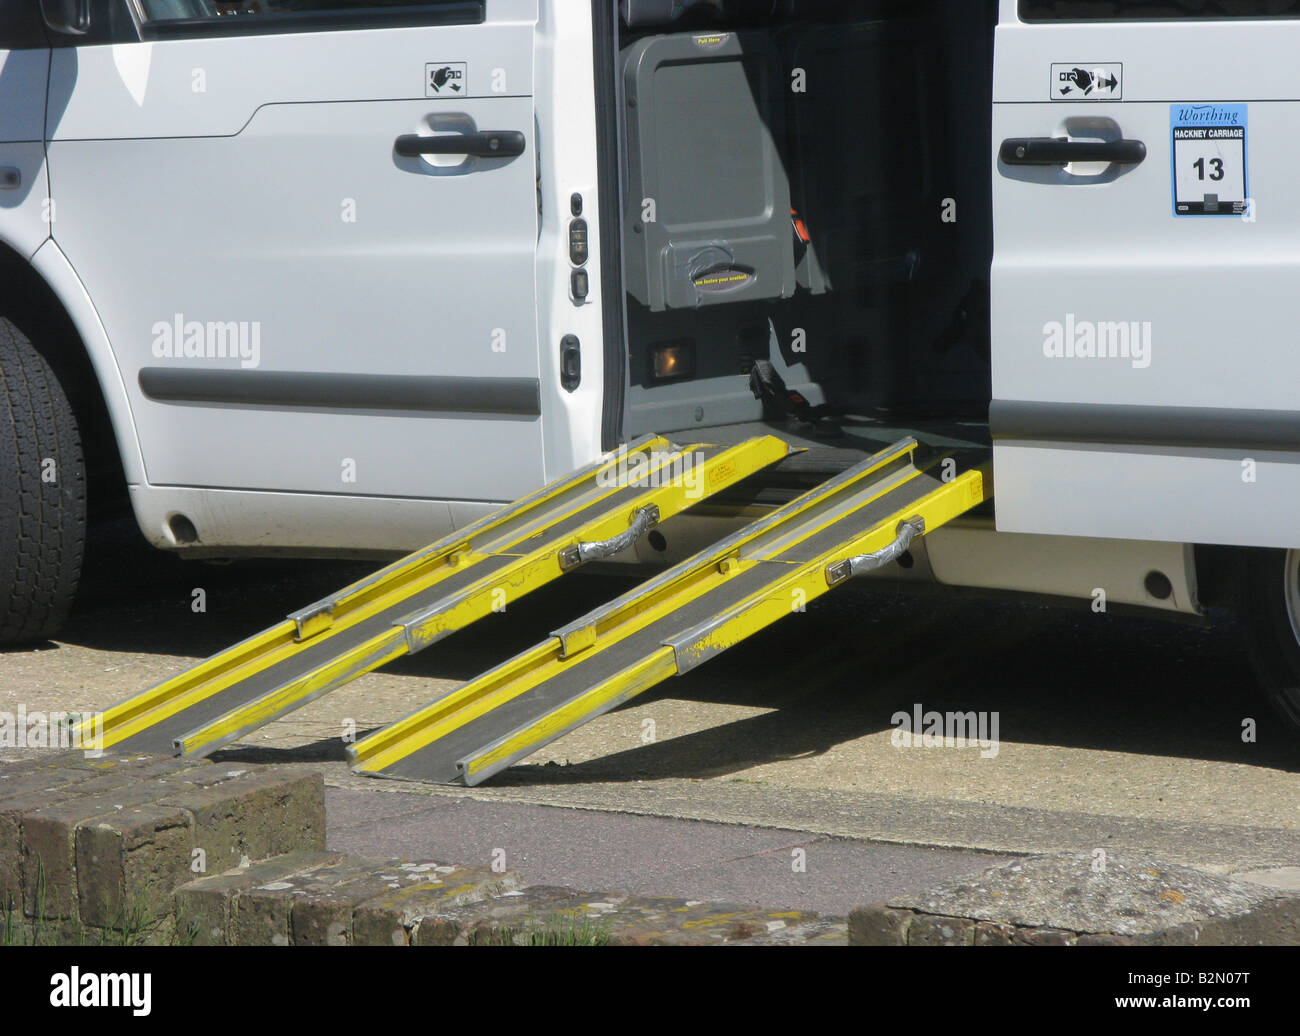 a two piece slip resistant ramp in place from the road to a wheelchair friendly taxi for the disabled enabling mobility Stock Photo